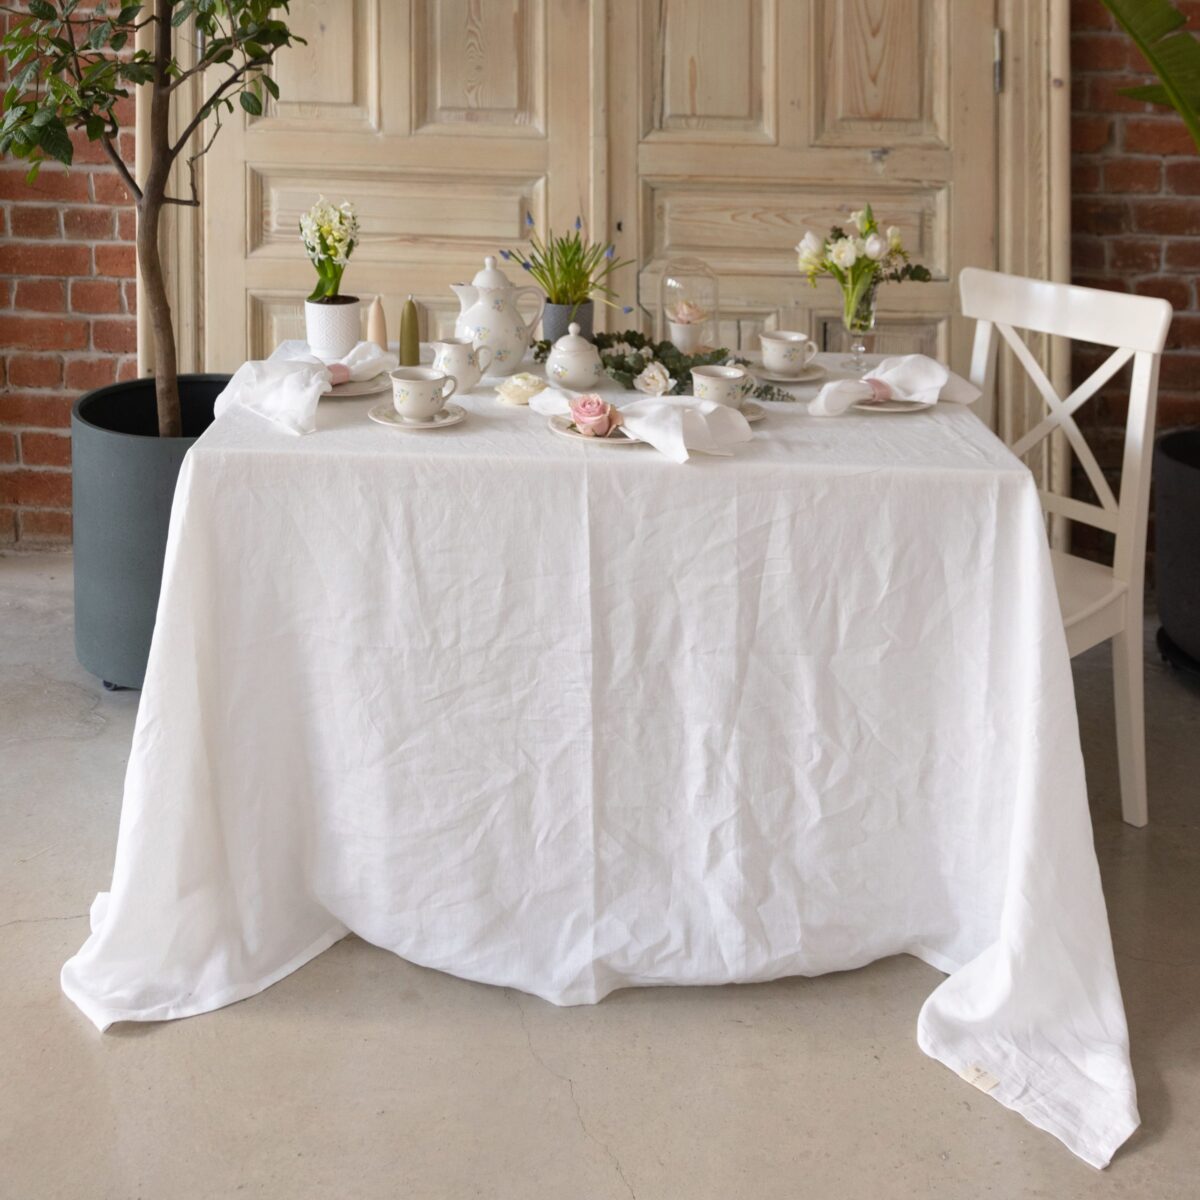 STONEWASHED TABLE CLOTH GENTLE WHITE